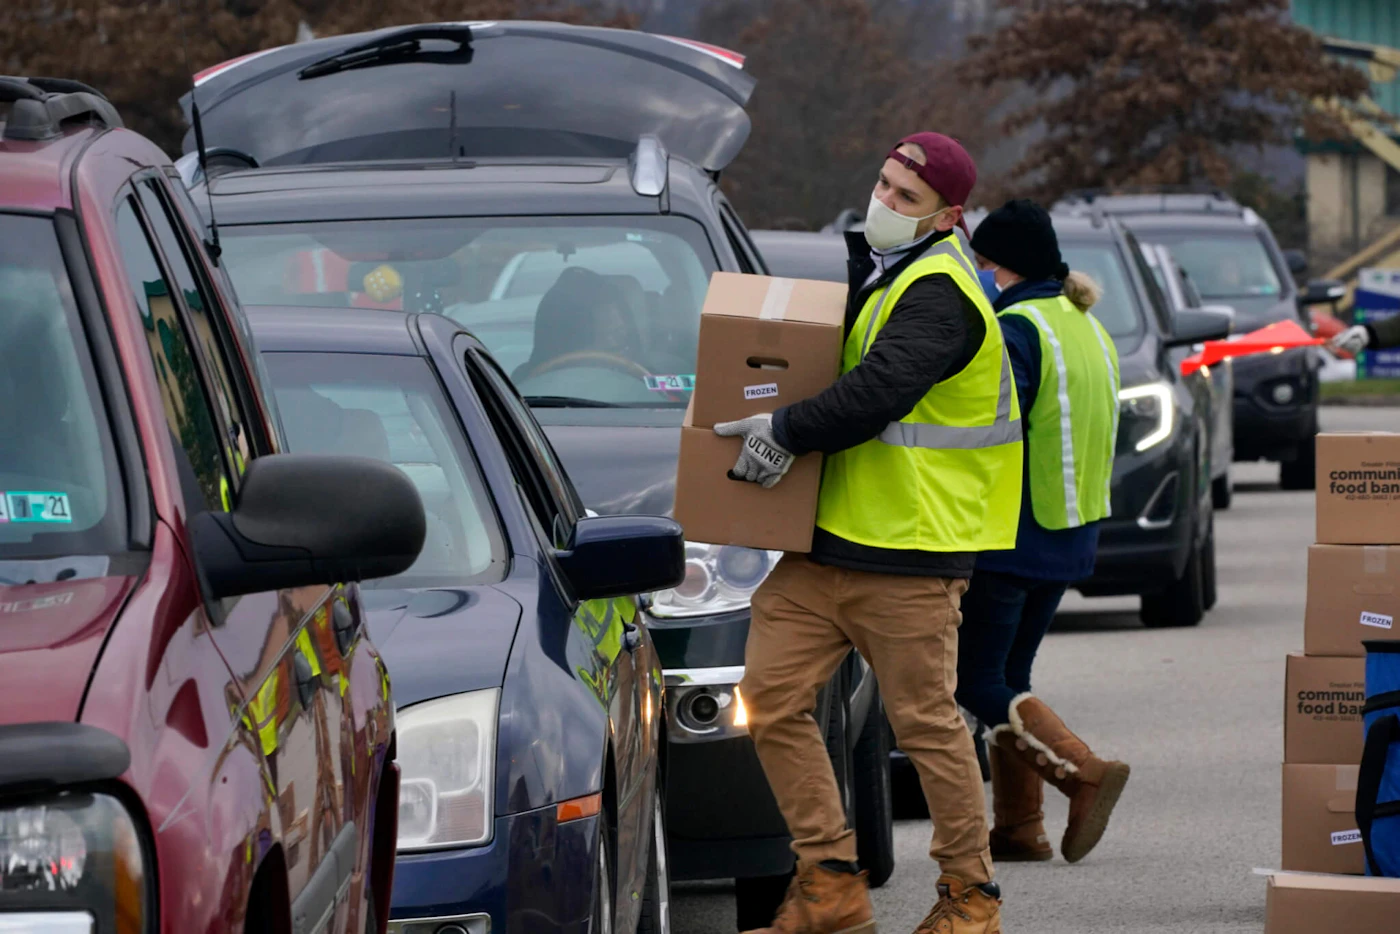 Volunteers load boxes of food into a car during a Greater Pittsburgh Community Food bank drive-up food distribution in Duquesne, Allegheny County, on Nov. 23, 2020. (AP Photo/Gene J. Puskar)